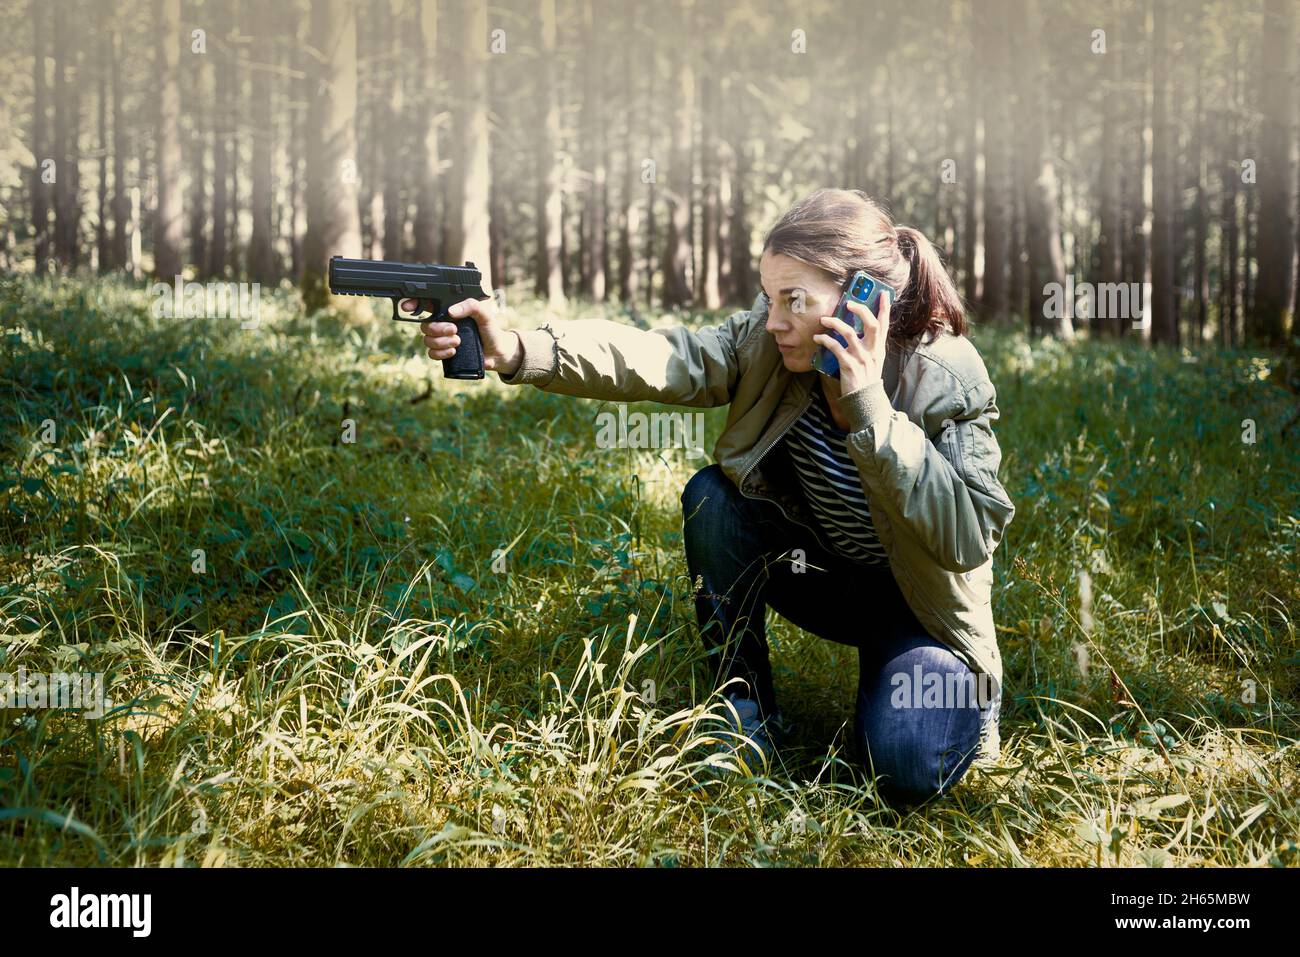 Woman crouching and aiming a gun and using a mobile phone. Stock Photo